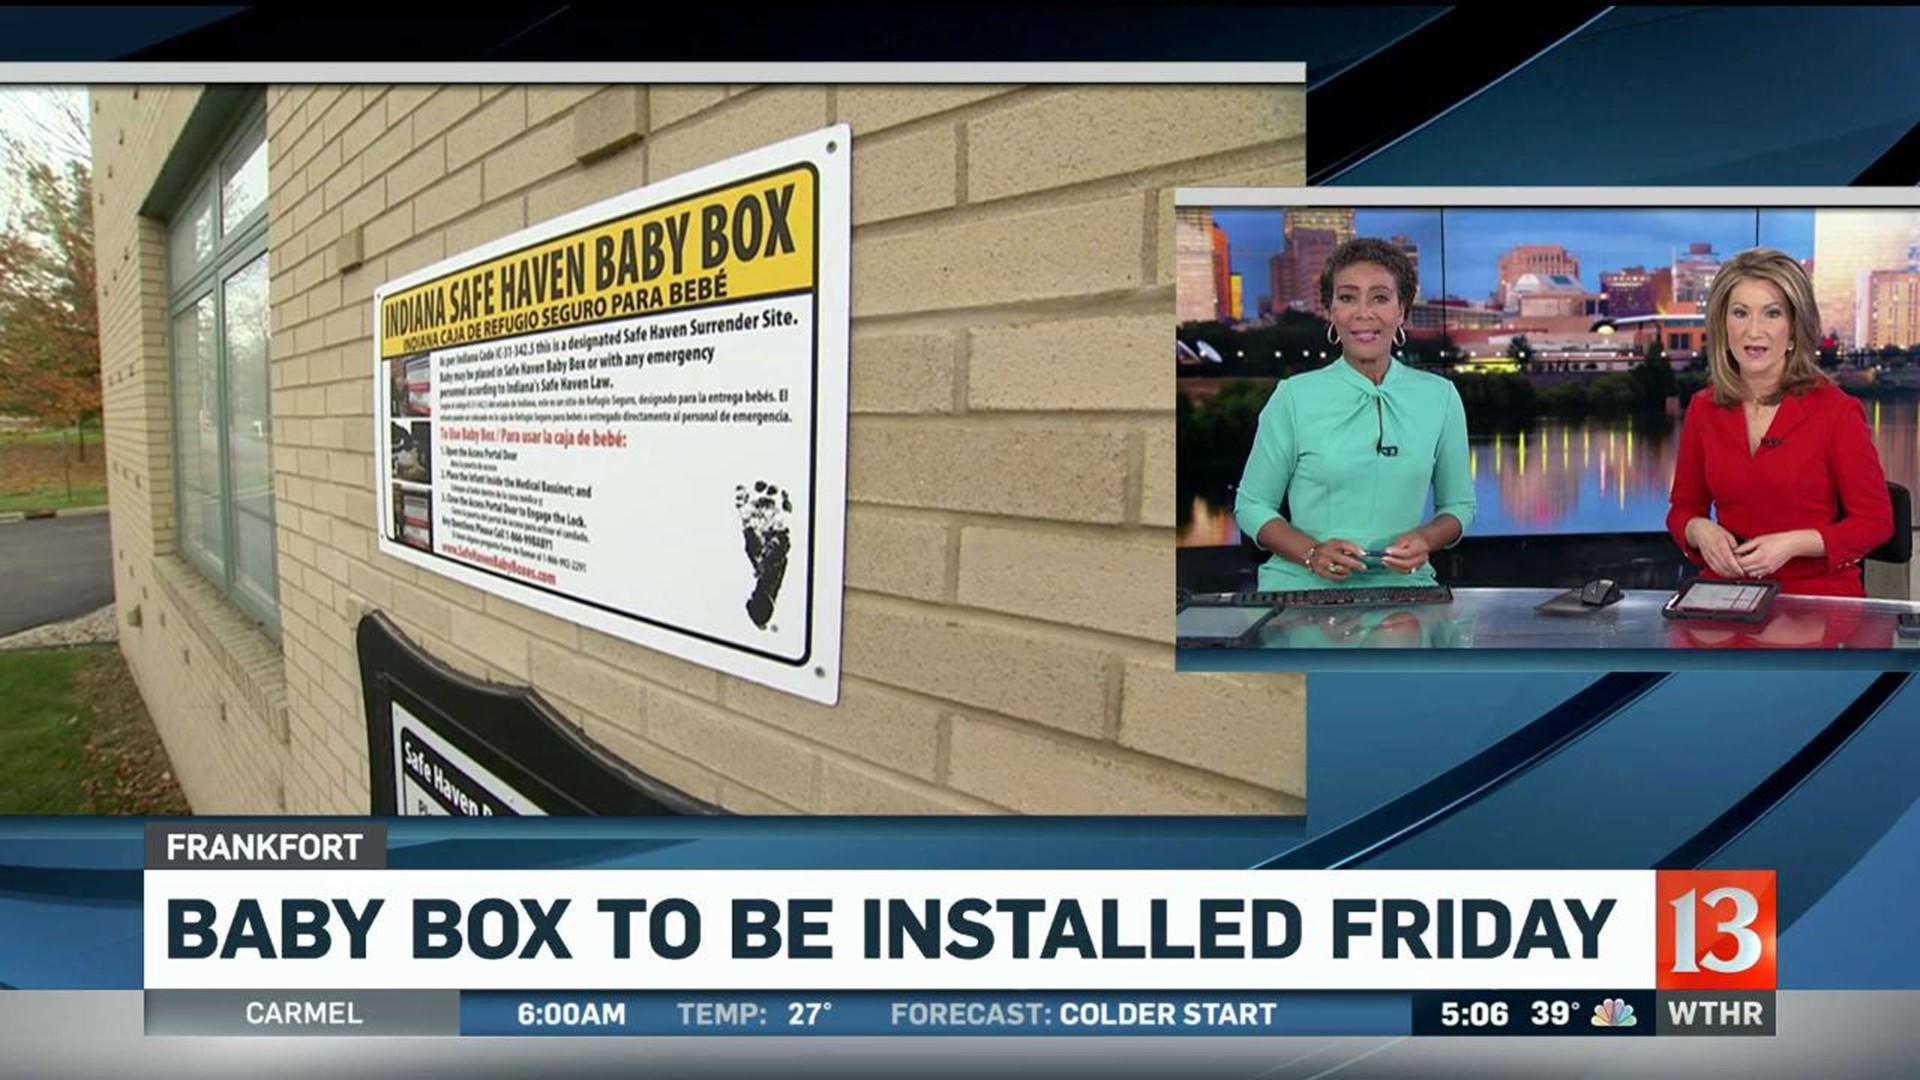 Baby box to be installed in Frankfort